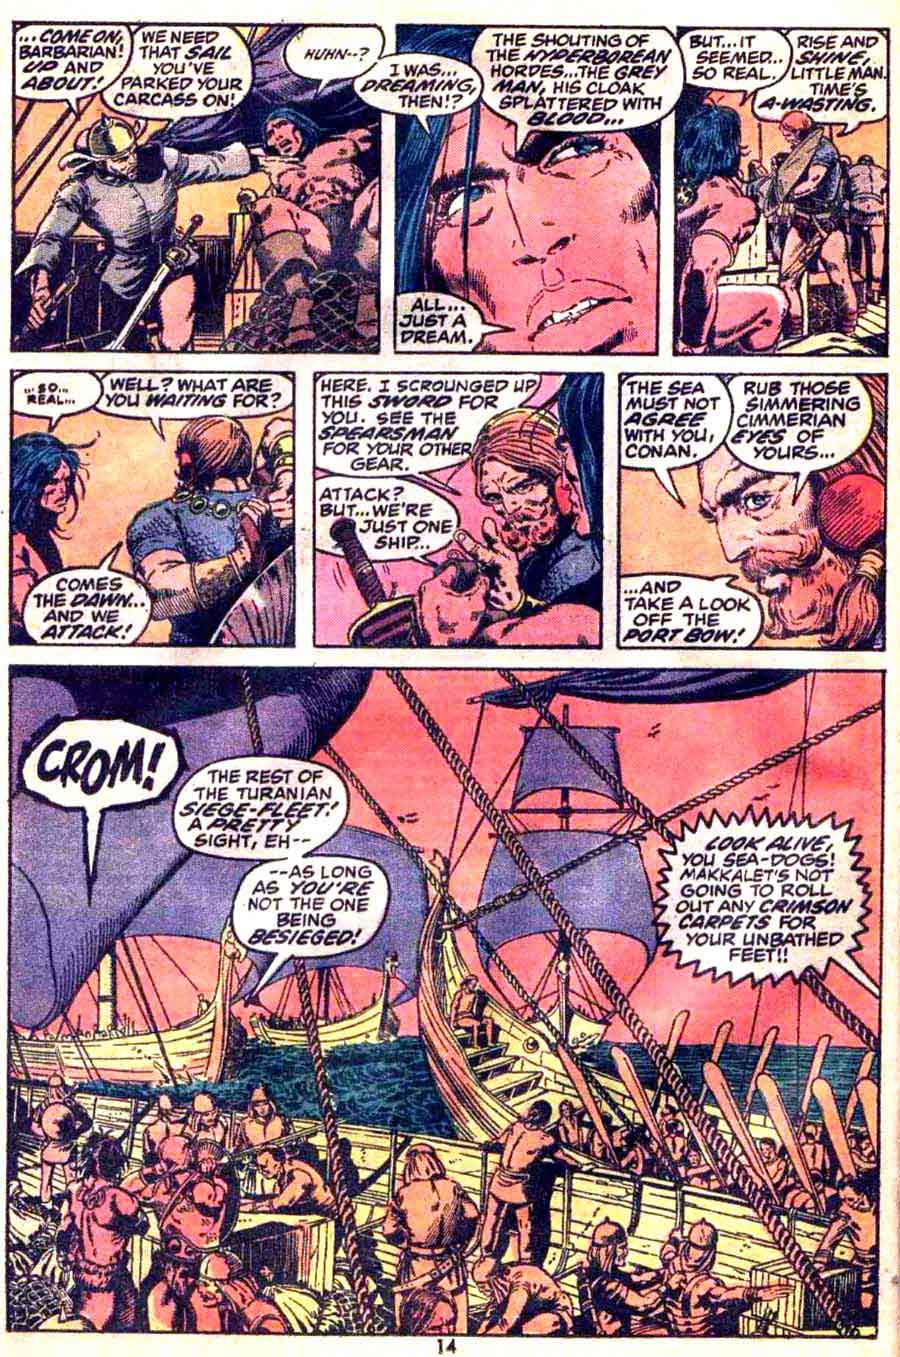 Conan the Barbarian v1 #17 marvel comic book page art by Barry Windsor Smith